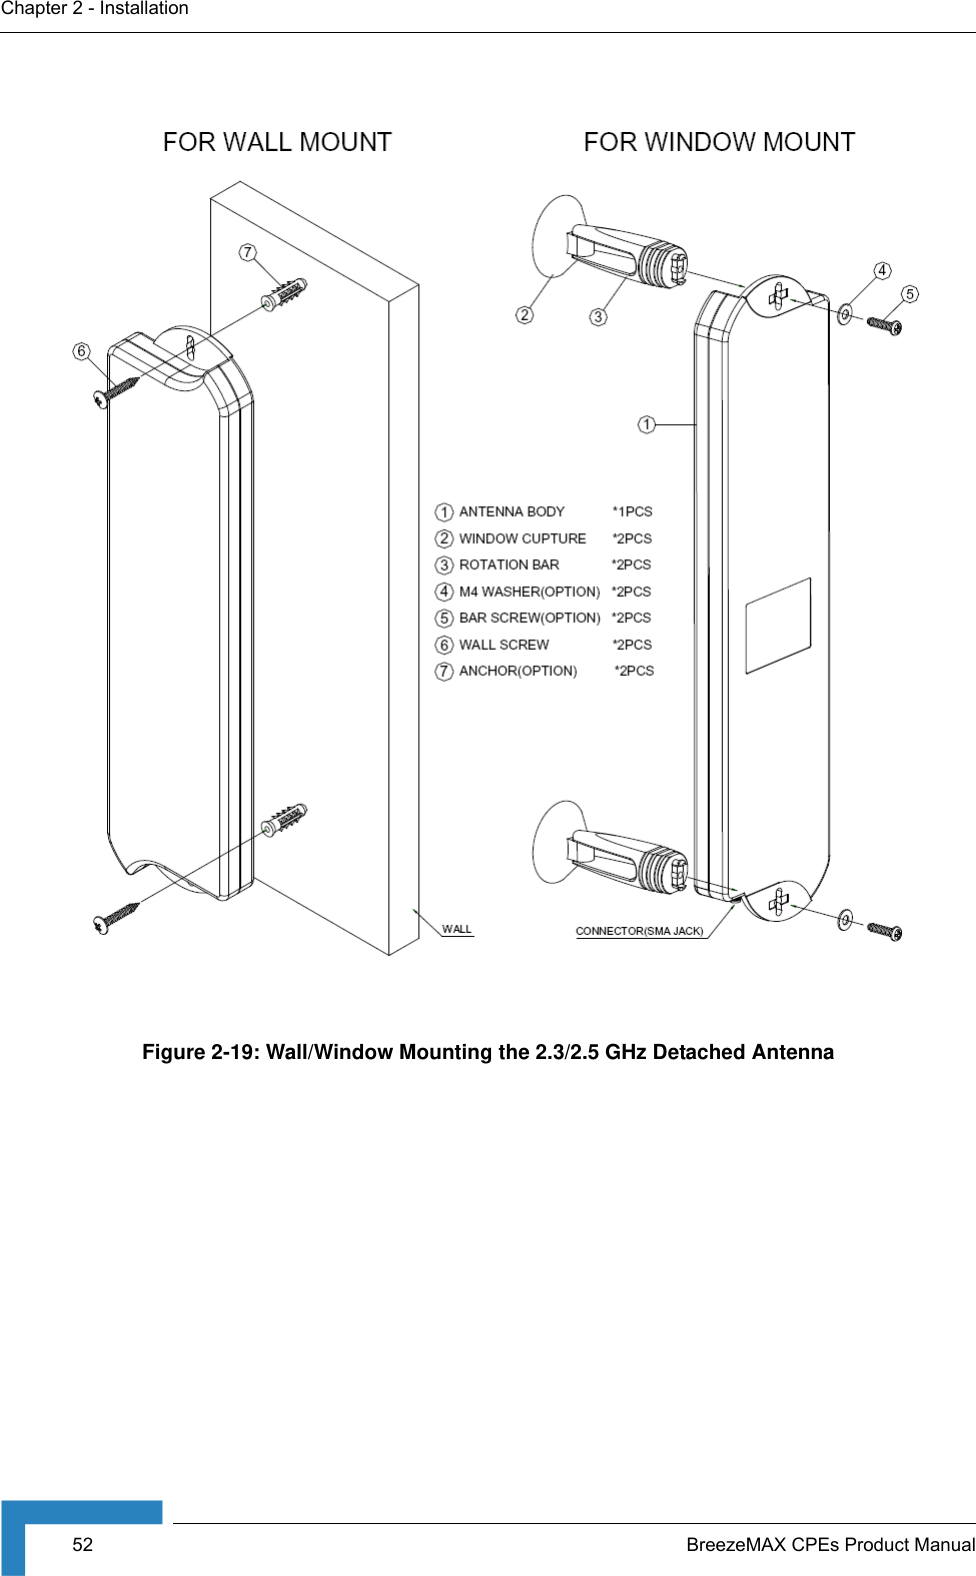 52 BreezeMAX CPEs Product ManualChapter 2 - InstallationFigure 2-19: Wall/Window Mounting the 2.3/2.5 GHz Detached Antenna